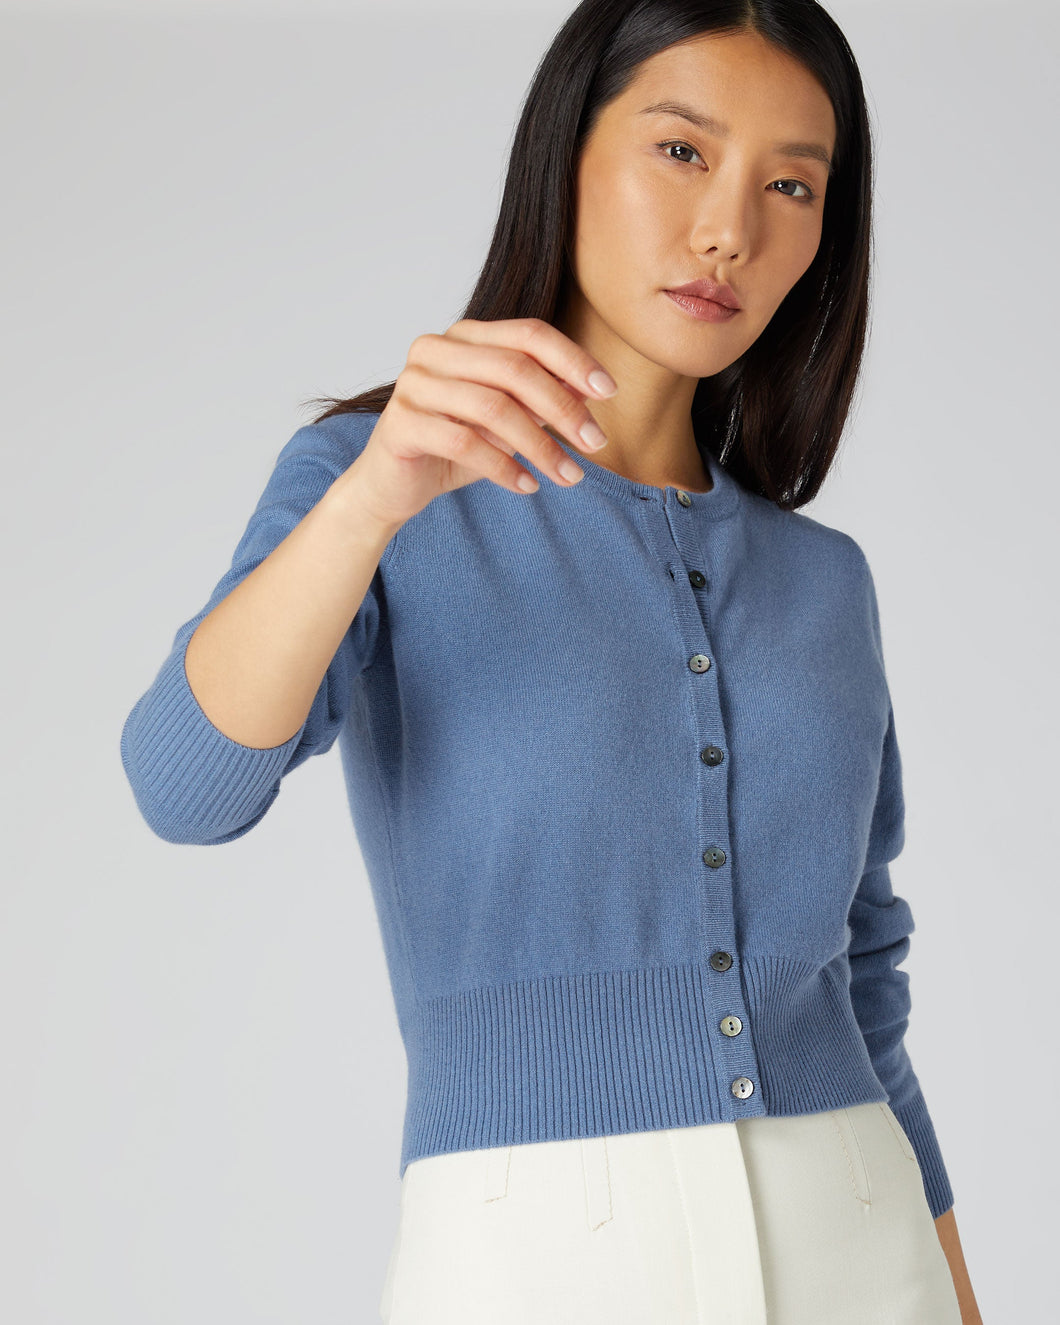 N.Peal Women's Long Sleeve Cropped Cashmere Cardigan Alpine Blue